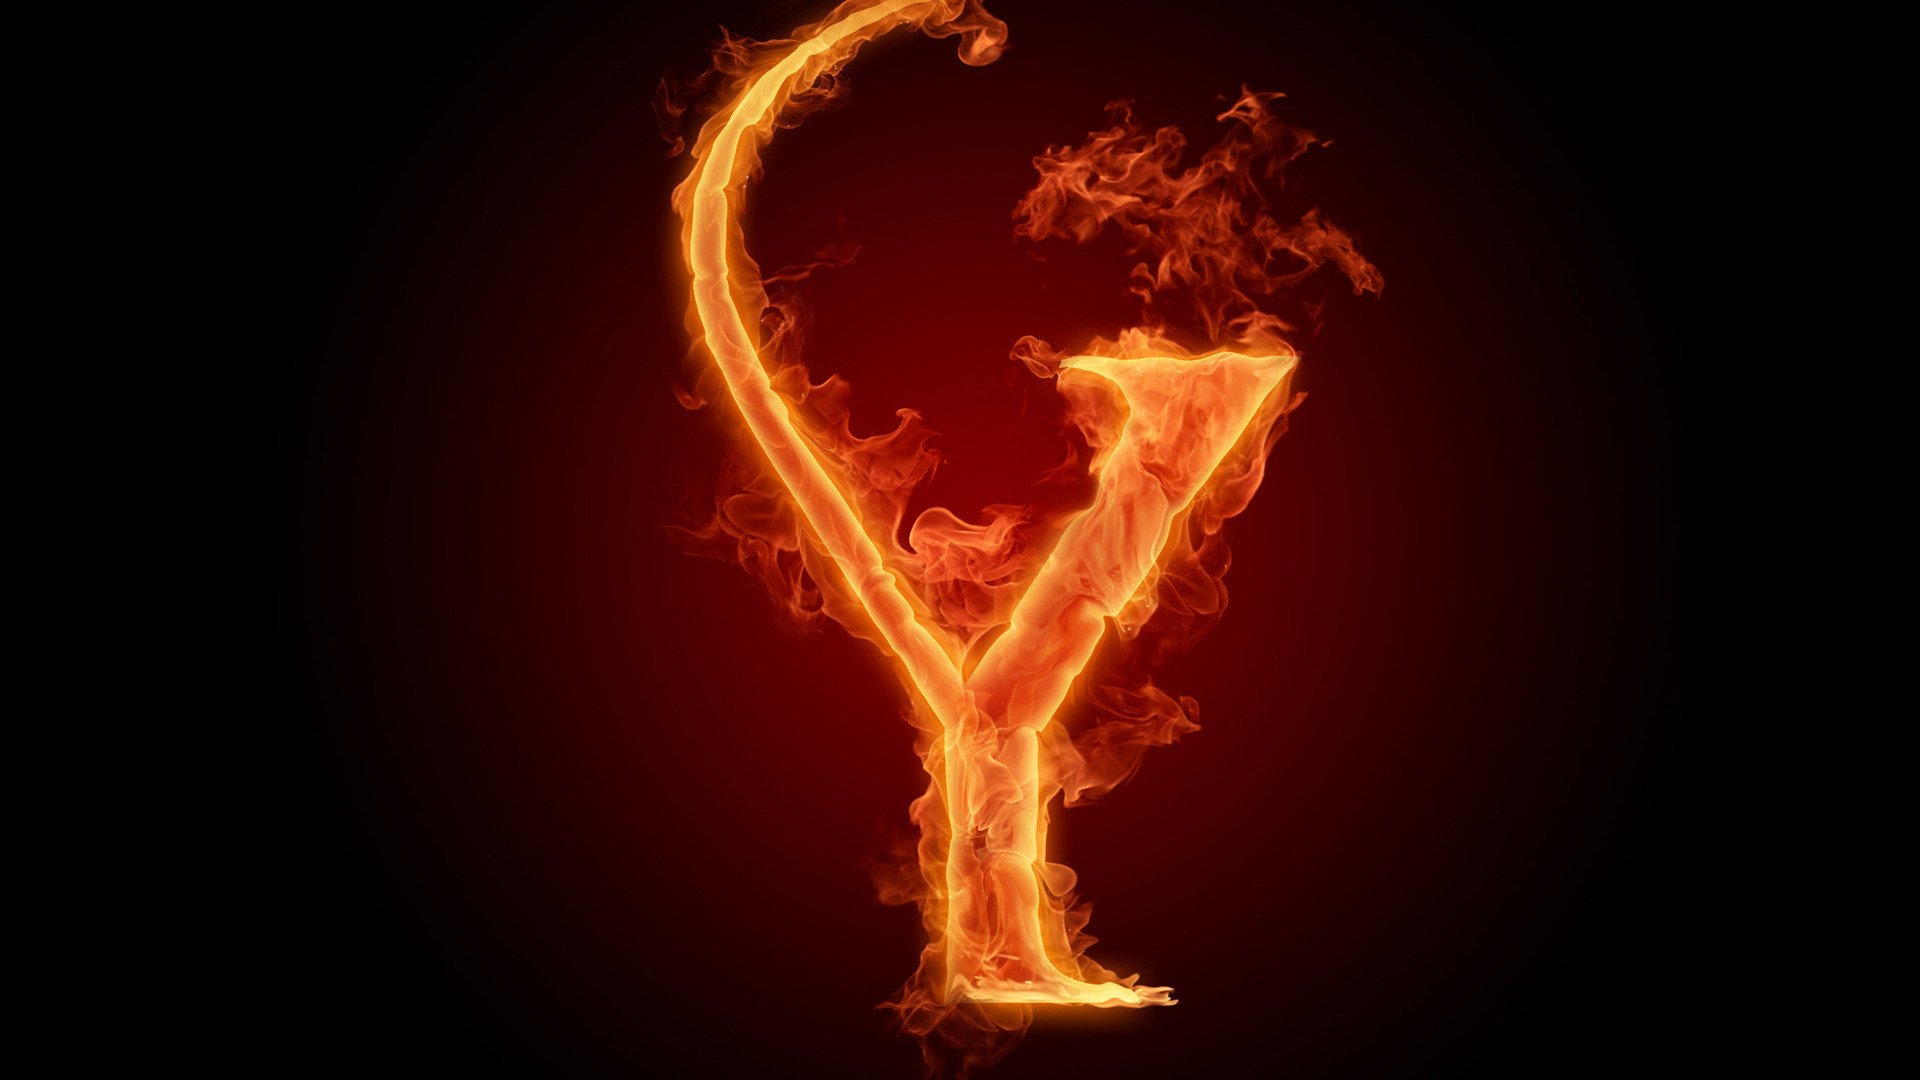 Download Letter Y 240 X 320 Wallpapers - Letter Y Wallpapers For Mobile Hd - HD Wallpaper 